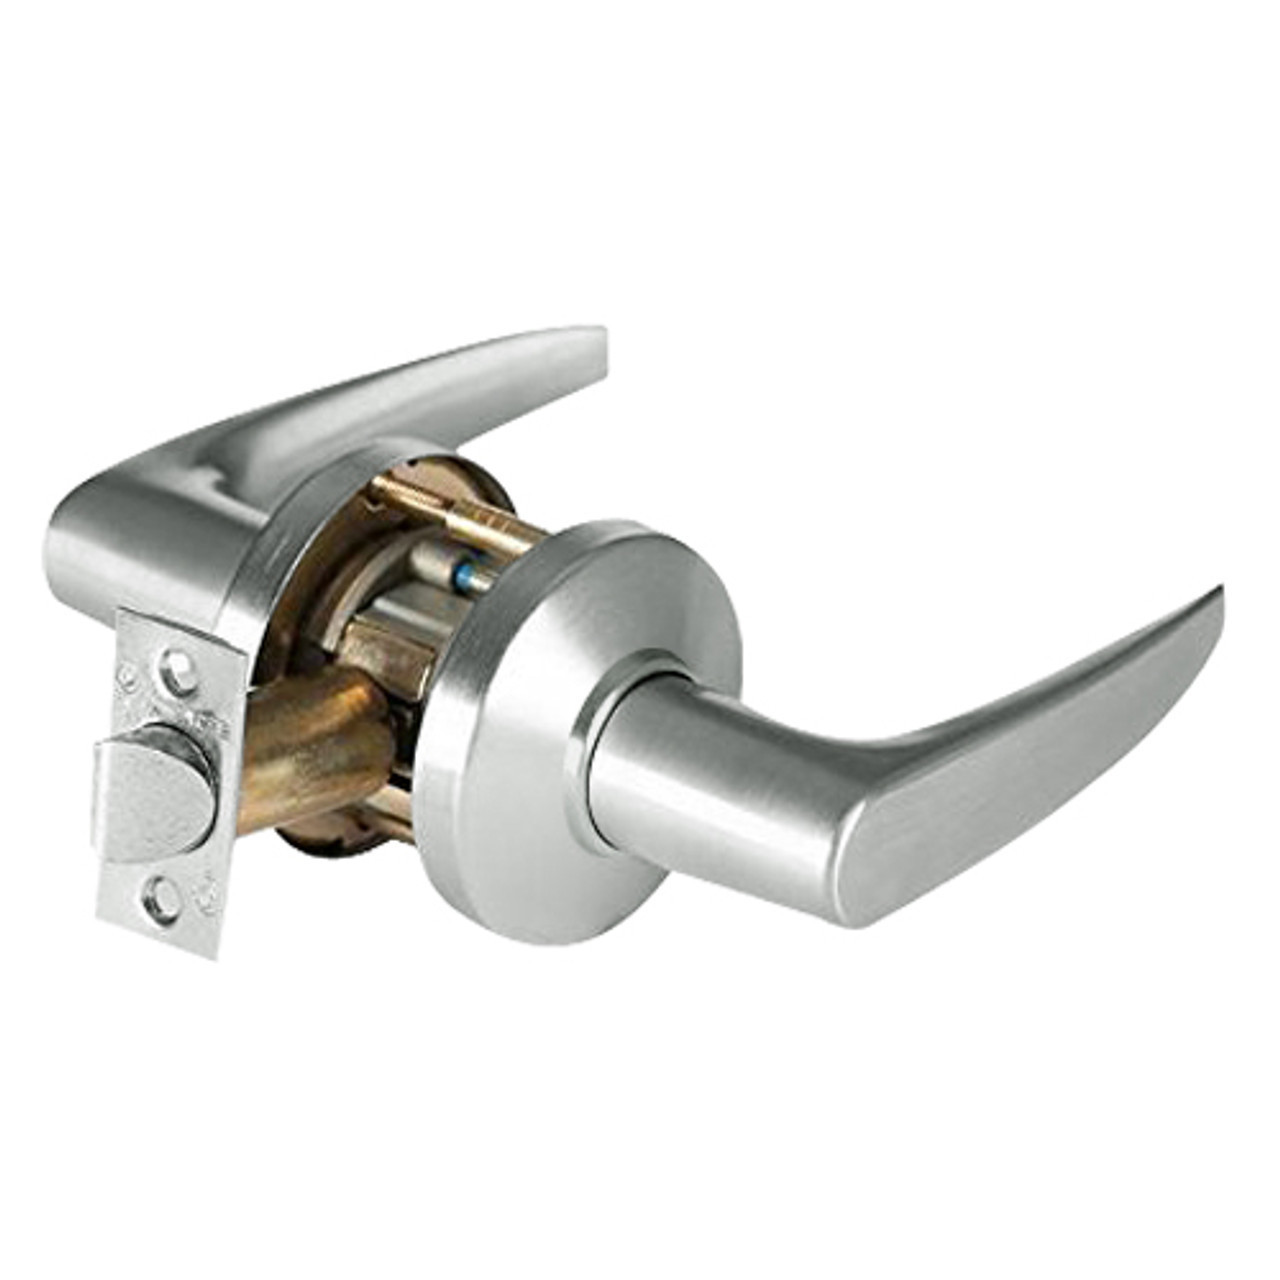 9K50N16CSTK618LM Best 9K Series Passage Heavy Duty Cylindrical Lever Locks with Curved Without Return Lever Design in Bright Nickel